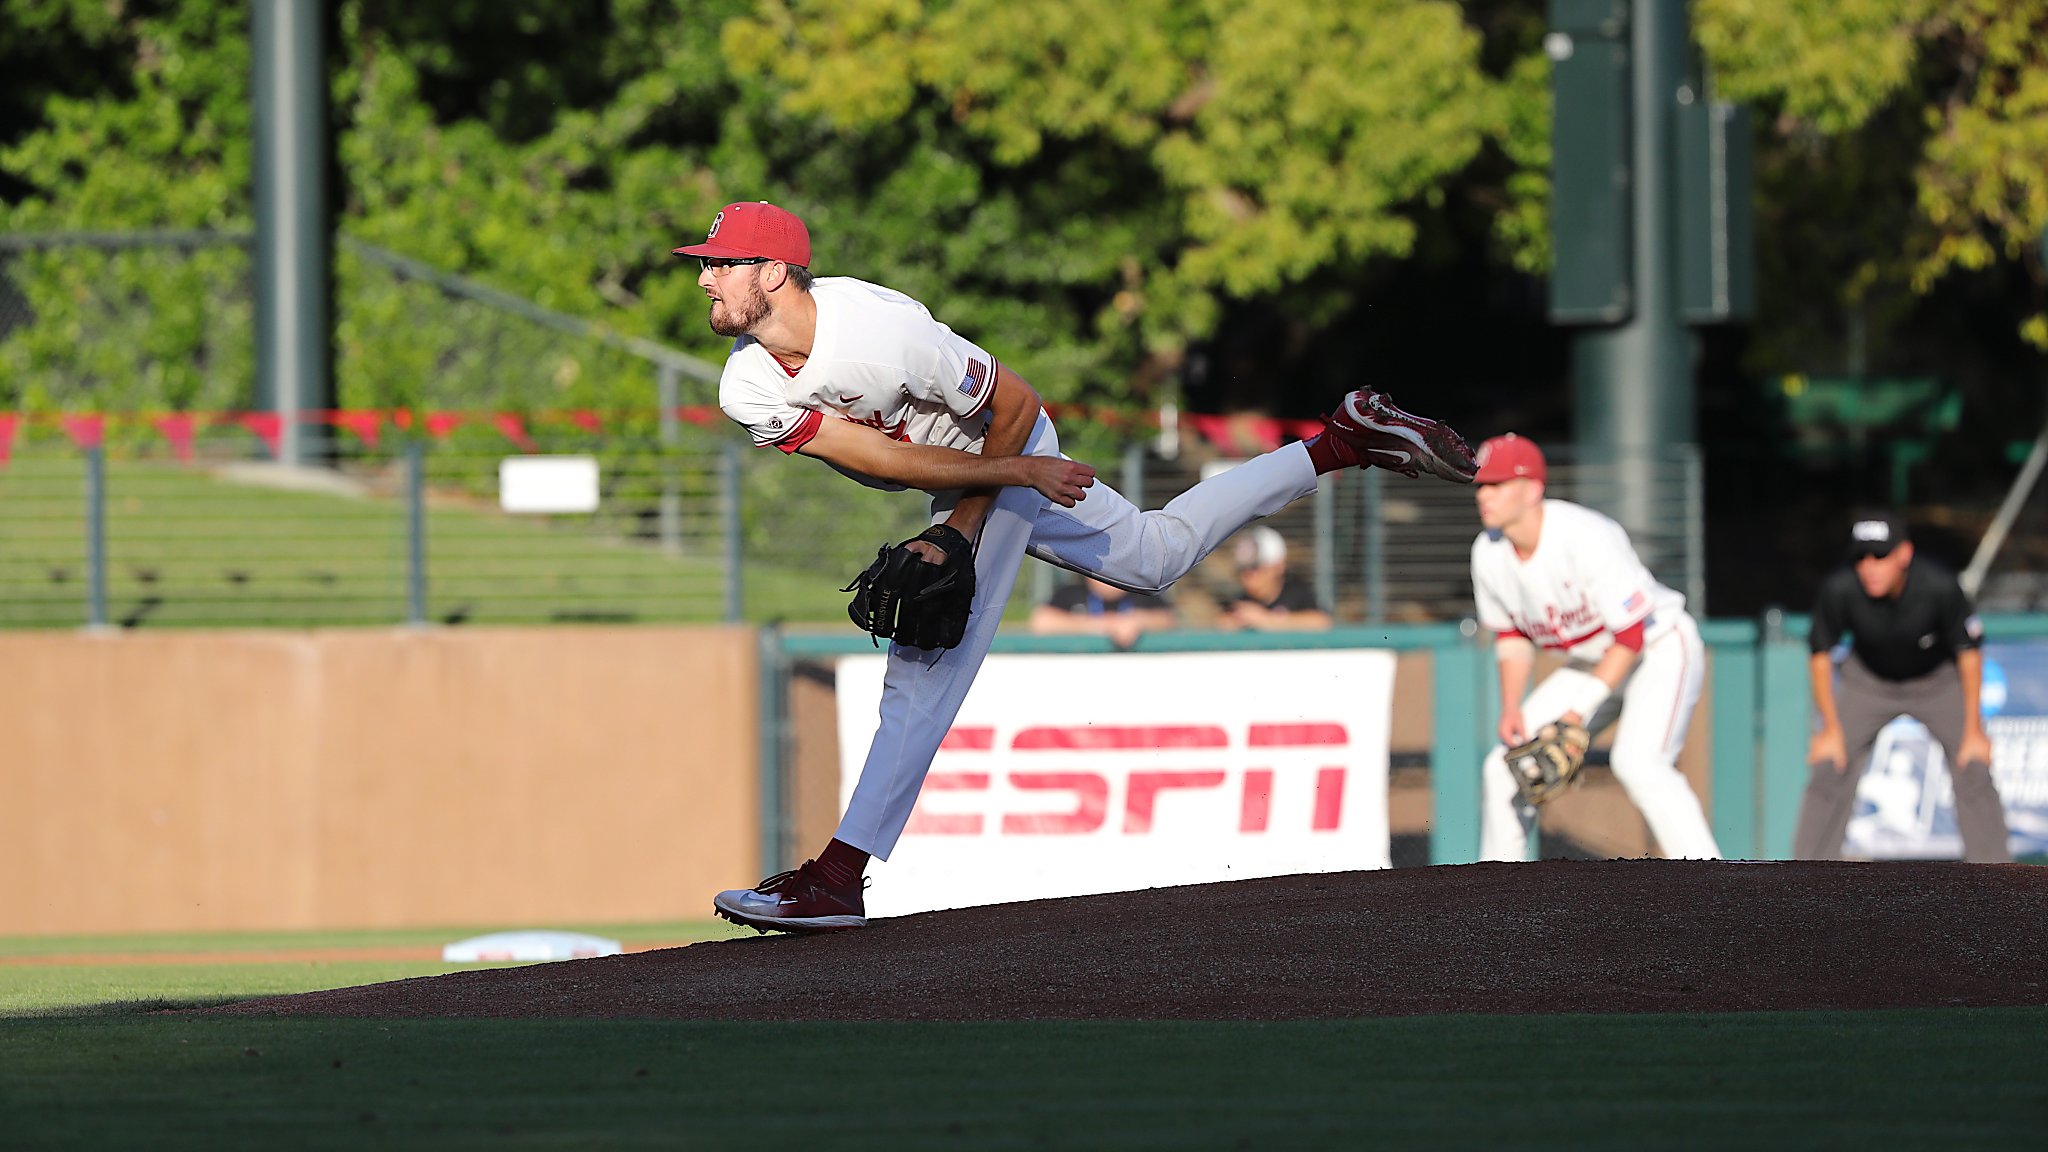 Kyle Stowers and Brandon Wulff homered - Stanford Baseball